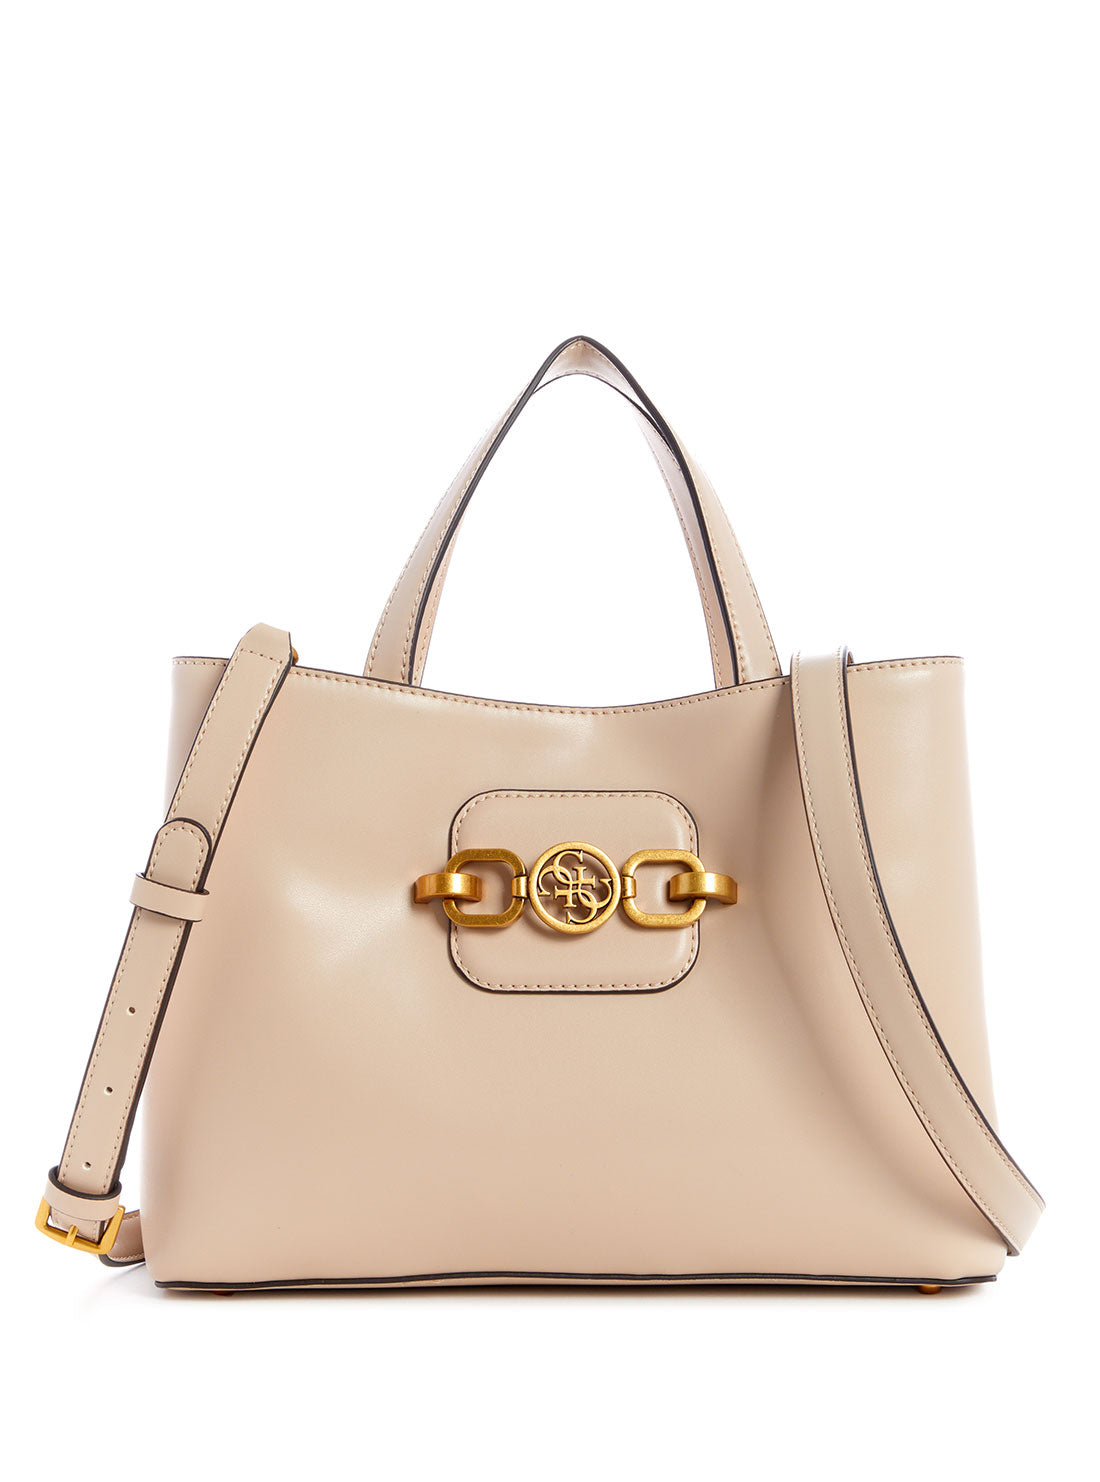 GUESS Womens  Beige Hensely Girlfriend Satchel  VB811307 Front View